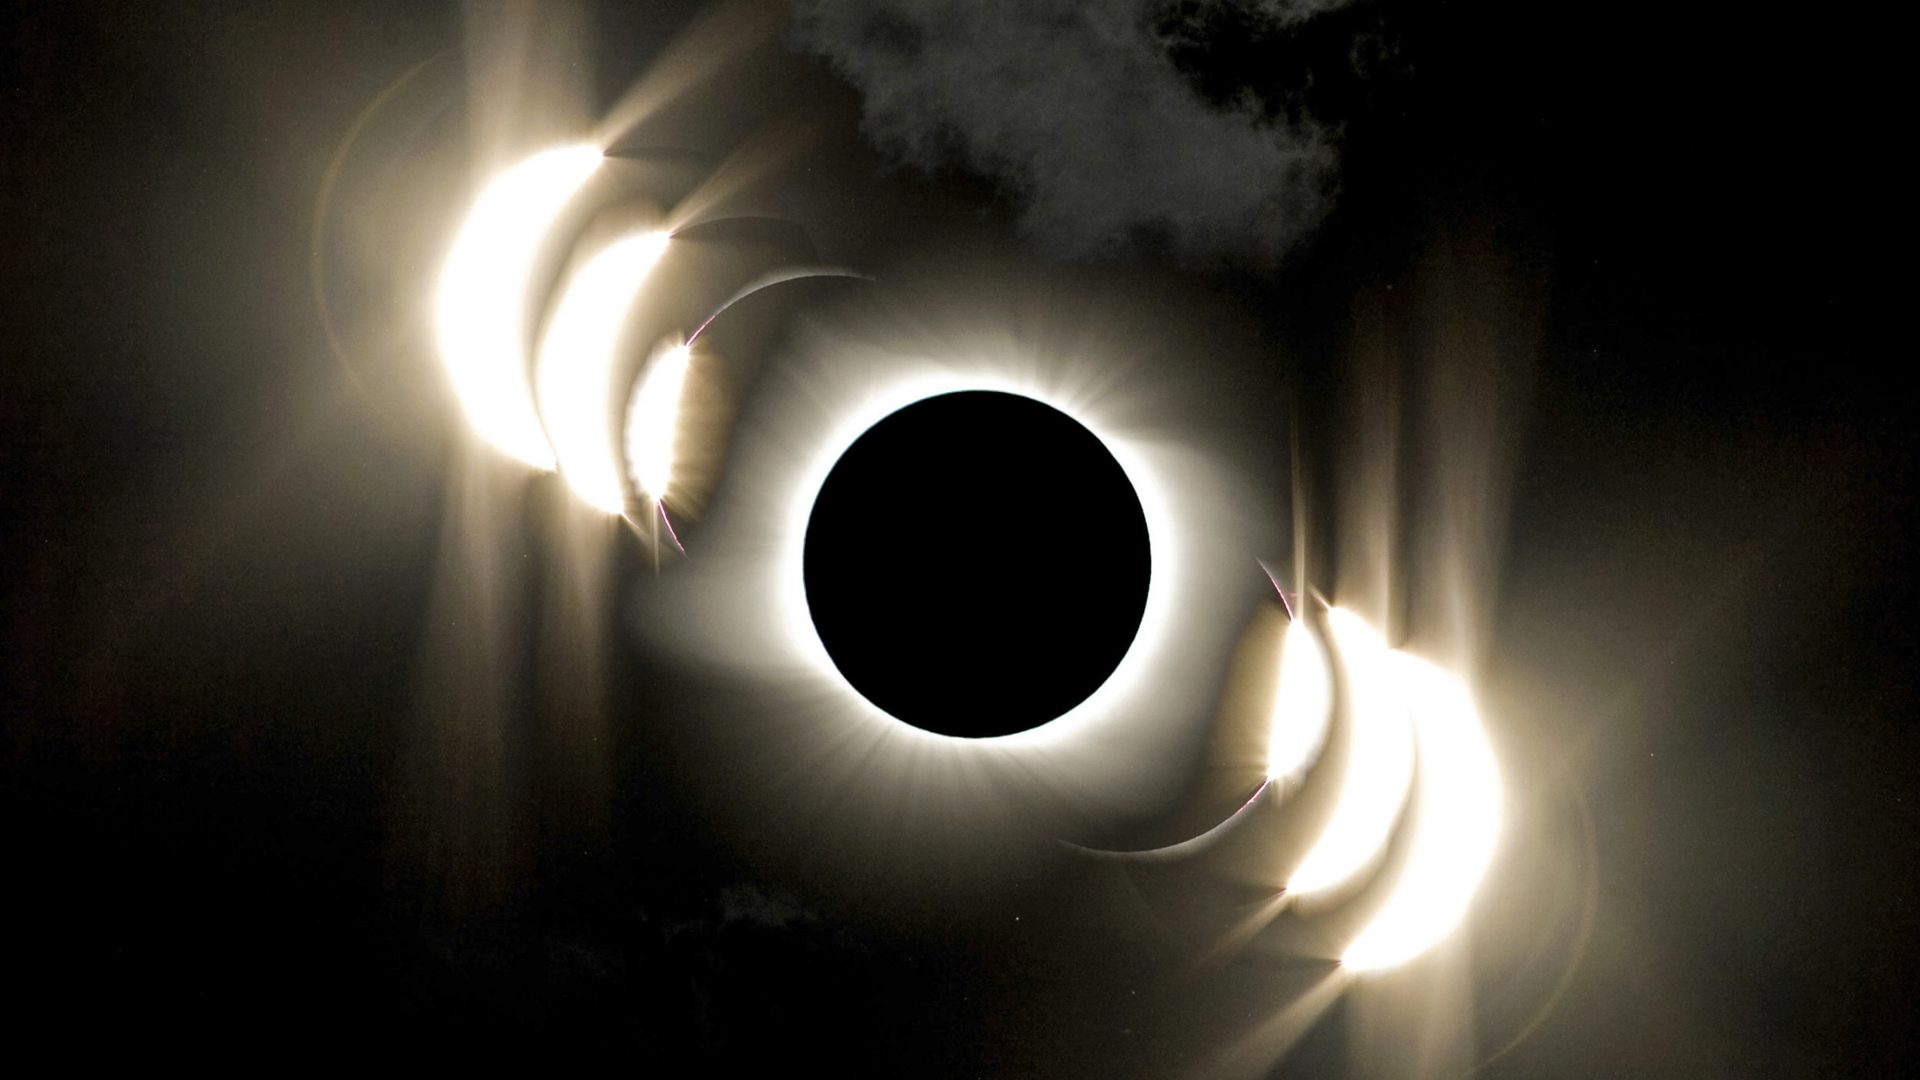 This photographer chases eclipses across 7 continents